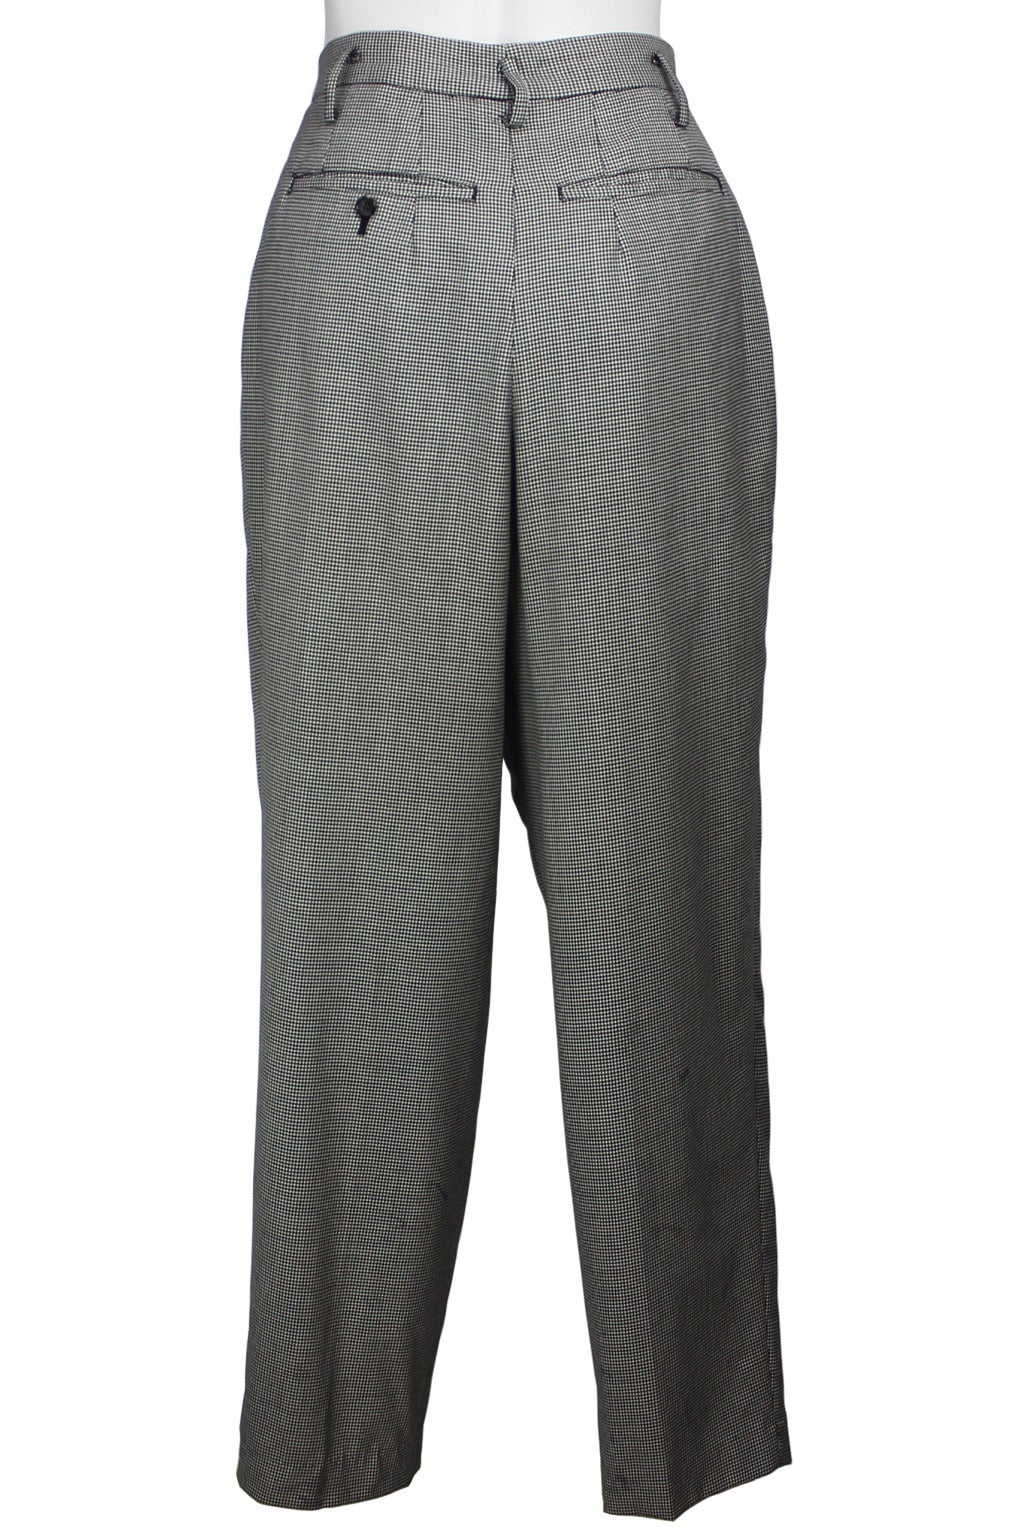 SALE! Originally $450
These high waisted wool houndstooth trousers with a double pleat reference classic masculine lines. With slanted pockets in front and slit pockets in back, they are slightly cropped and narrow at the bottom hem.